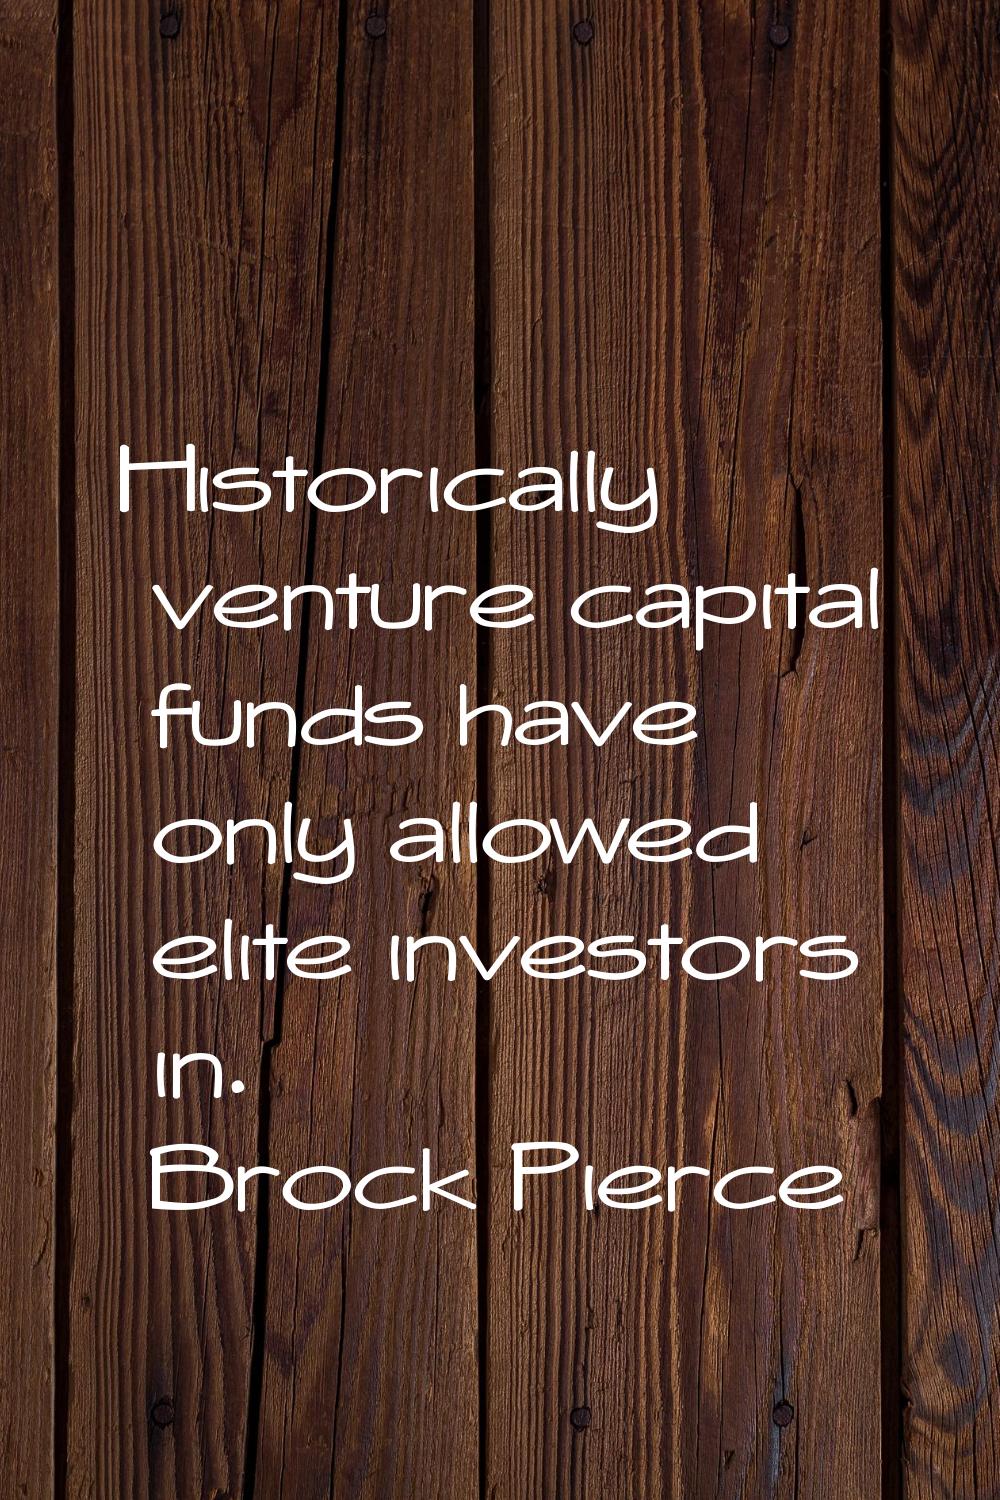 Historically venture capital funds have only allowed elite investors in.